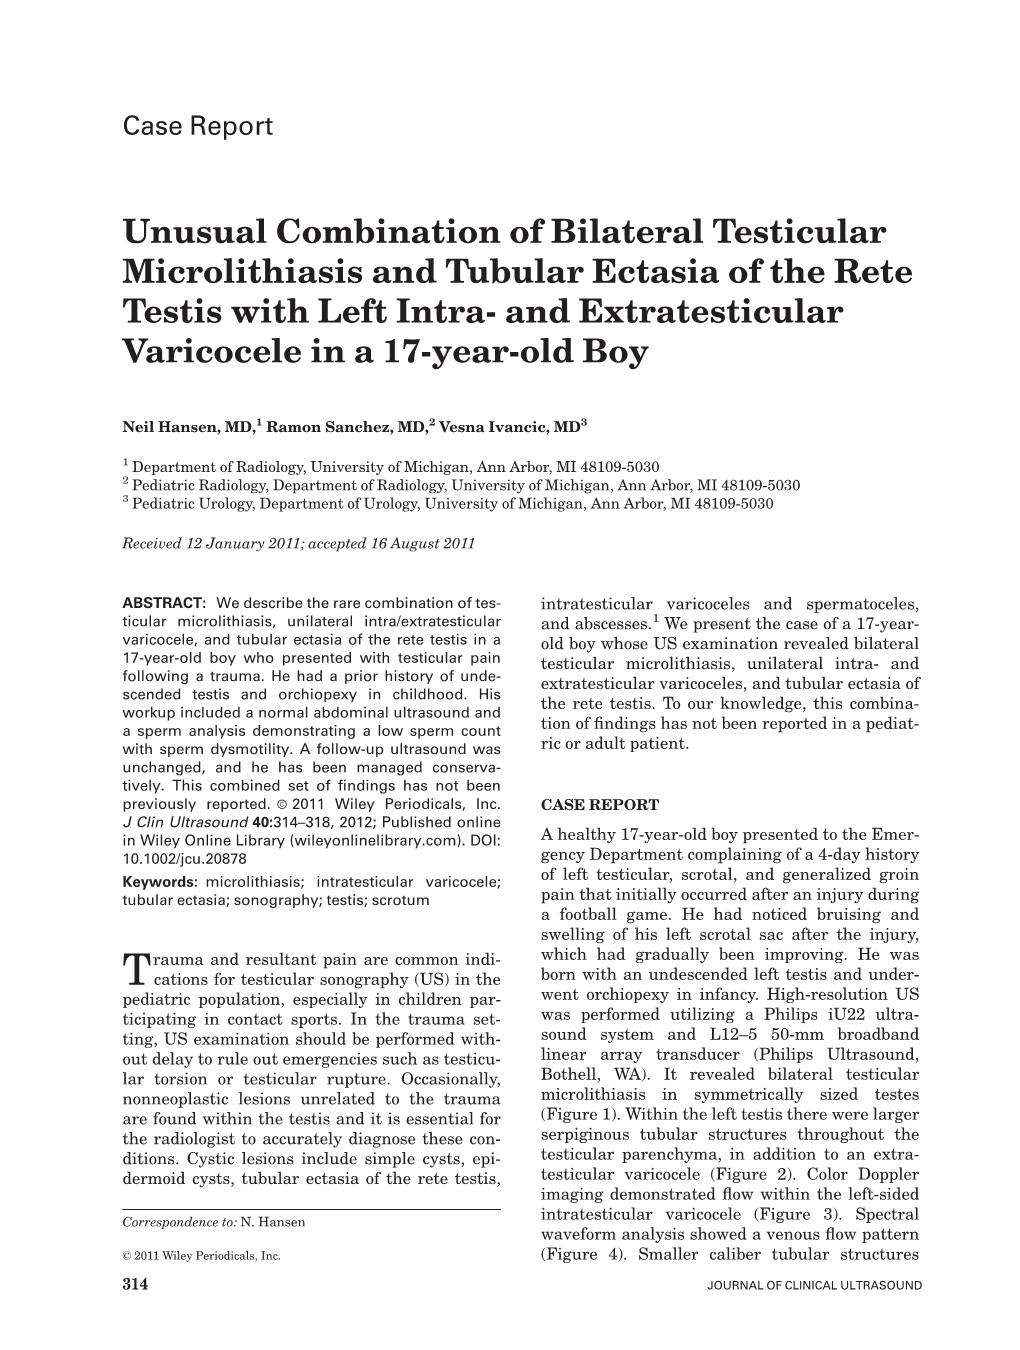 Unusual Combination of Bilateral Testicular Microlithiasis and Tubular Ectasia of the Rete Testis with Left Intra- and Extratesticular Varicocele in a 17-Year-Old Boy